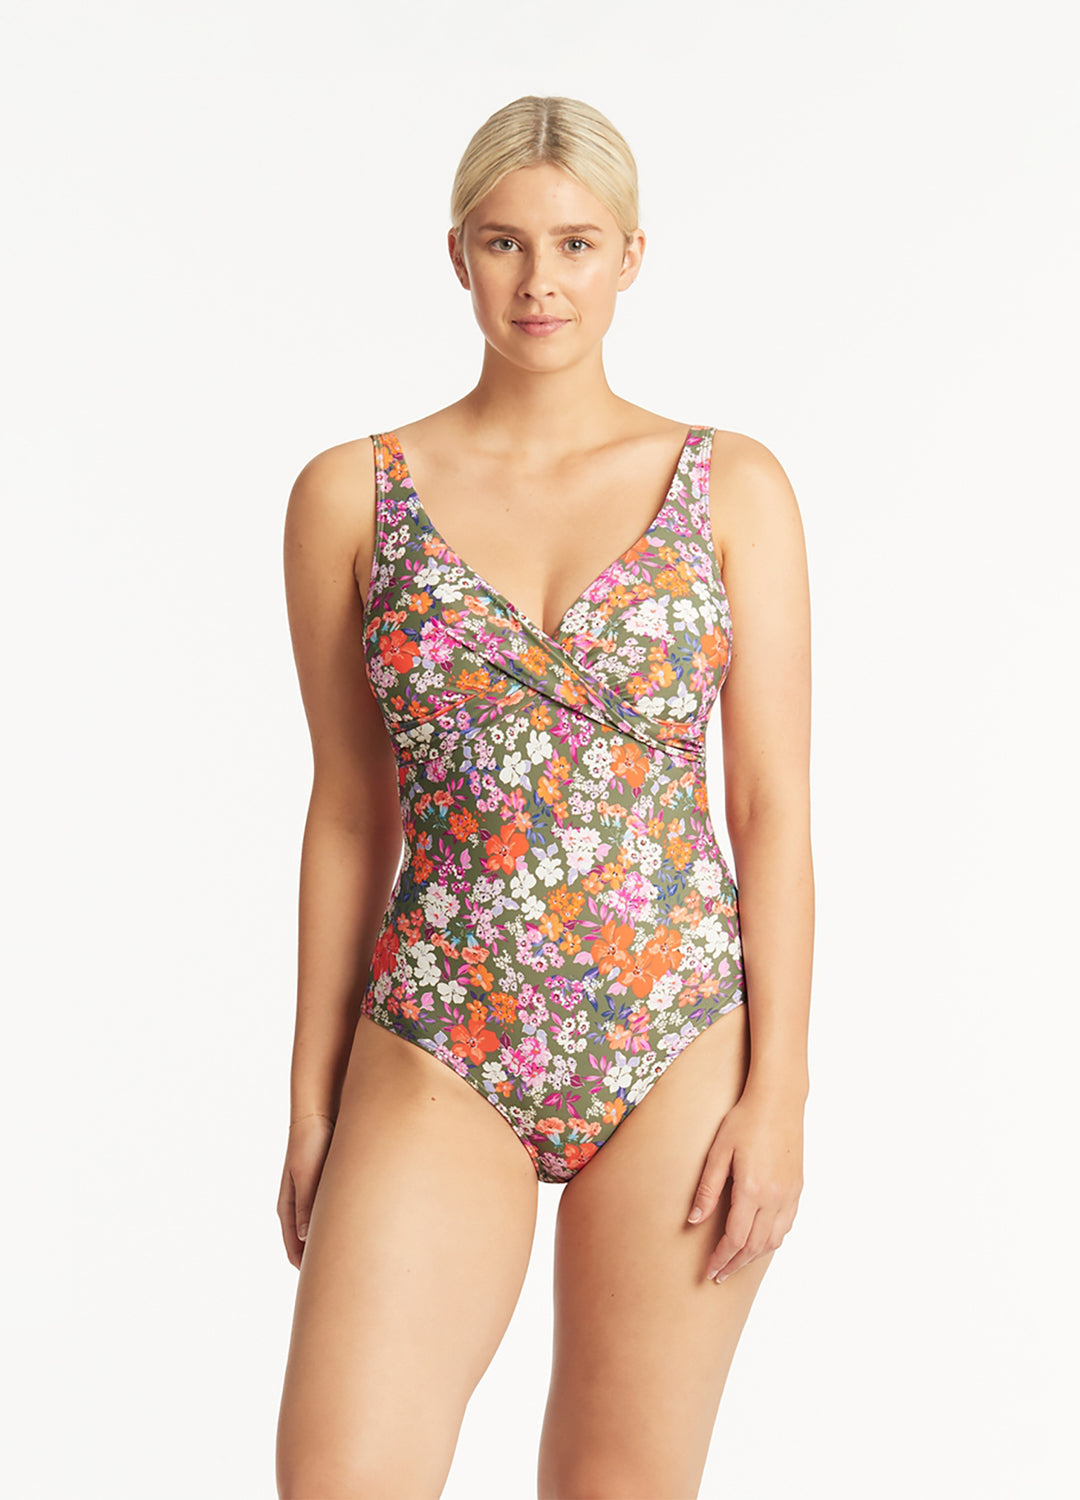 Front view of the Sea Level Swim Australia 'Parkland' Cross Front One Piece Swimsuit in Khaki floral print at Inner Beach Co, Toronto, Ontario, Canada